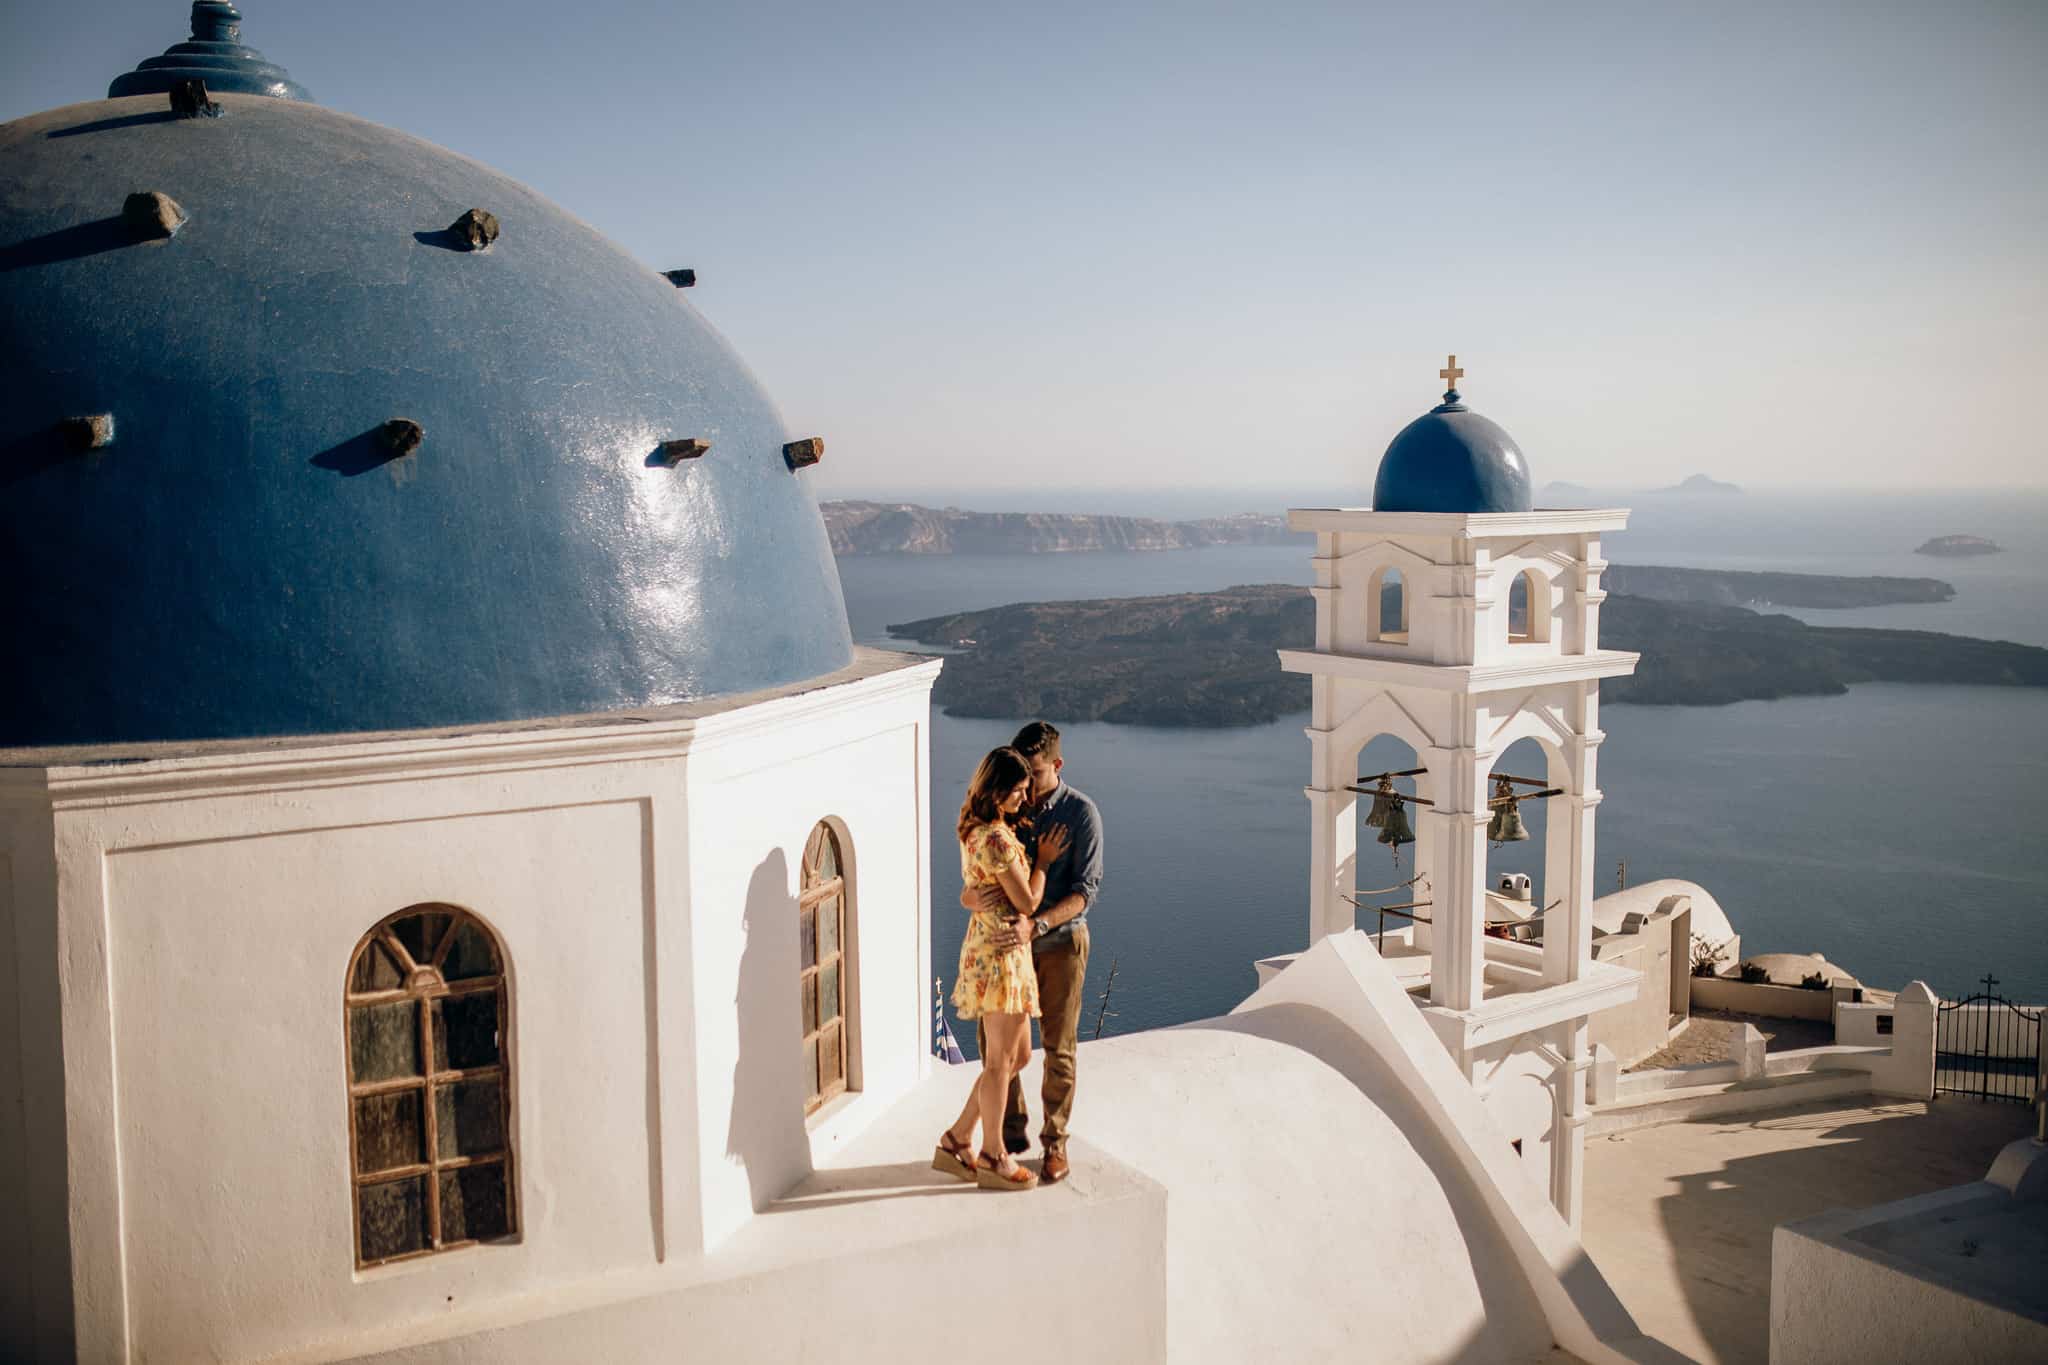 Kyle & Haley Goldie in Imerovigli, Santorini on top of a blue dome church